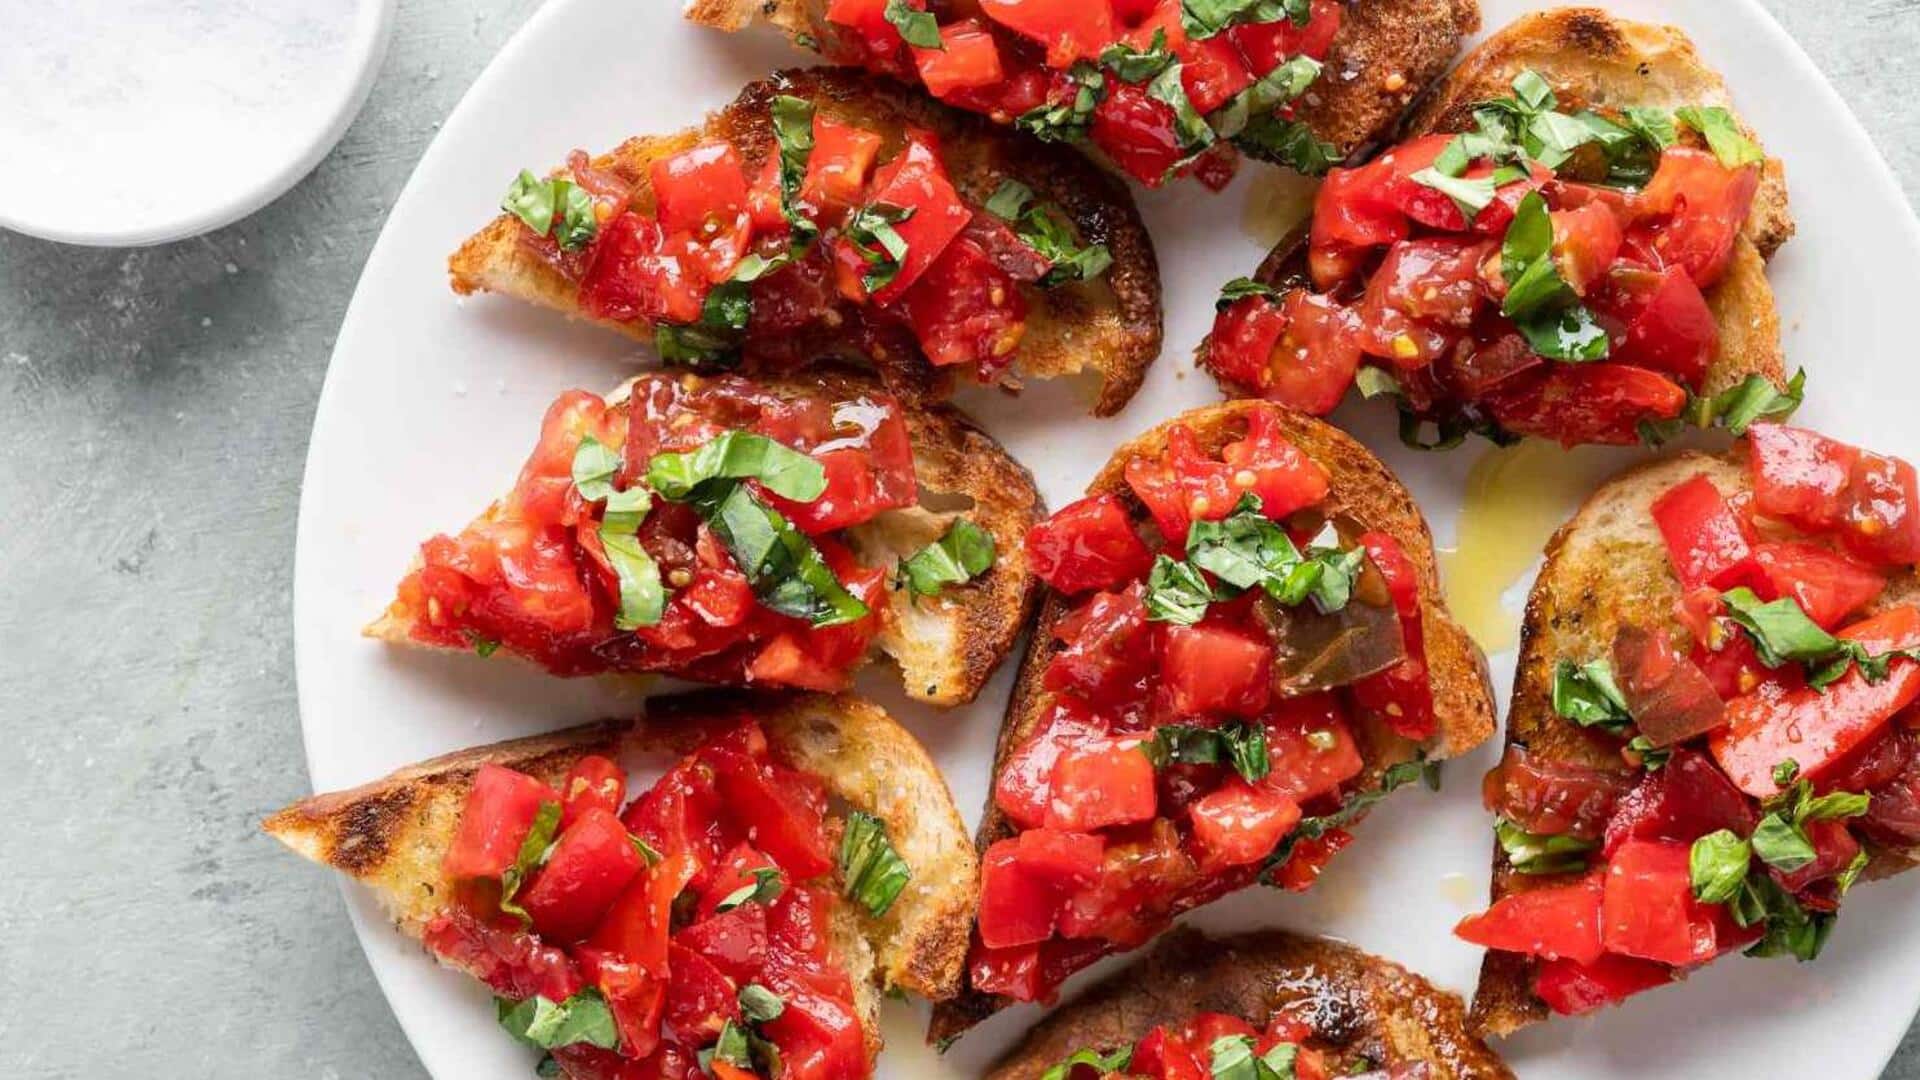 Cook this zesty tomato bruschetta in 4 simple steps